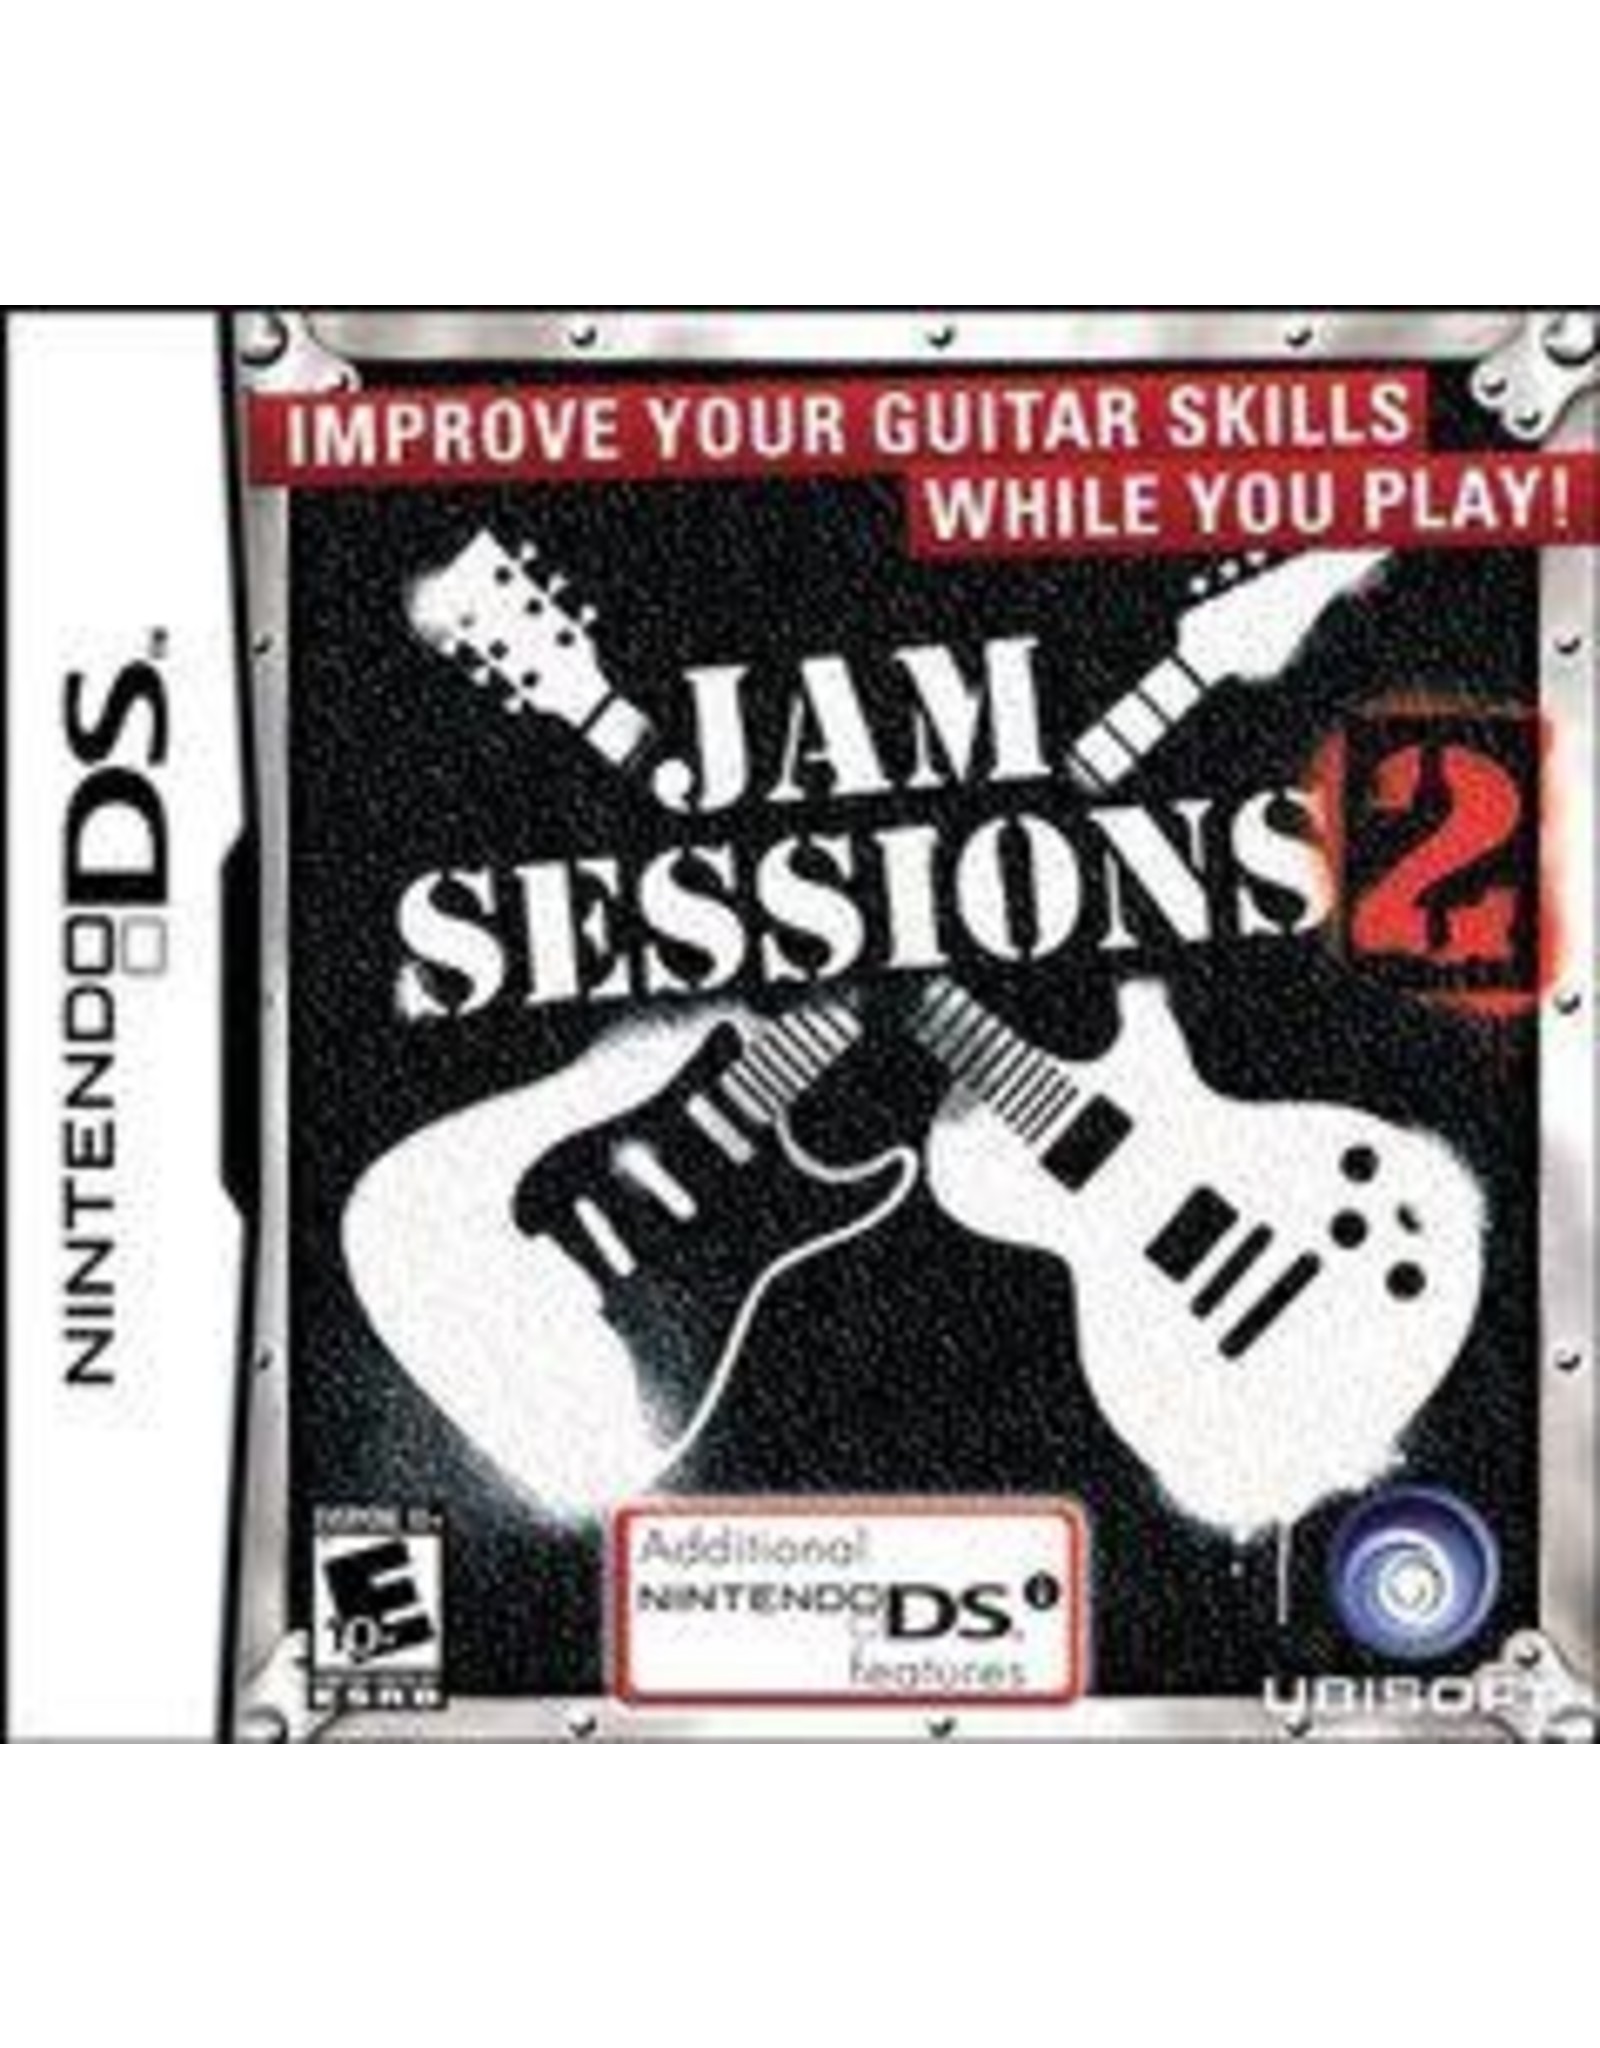 Nintendo DS Jam Sessions 2 (Cart Only)